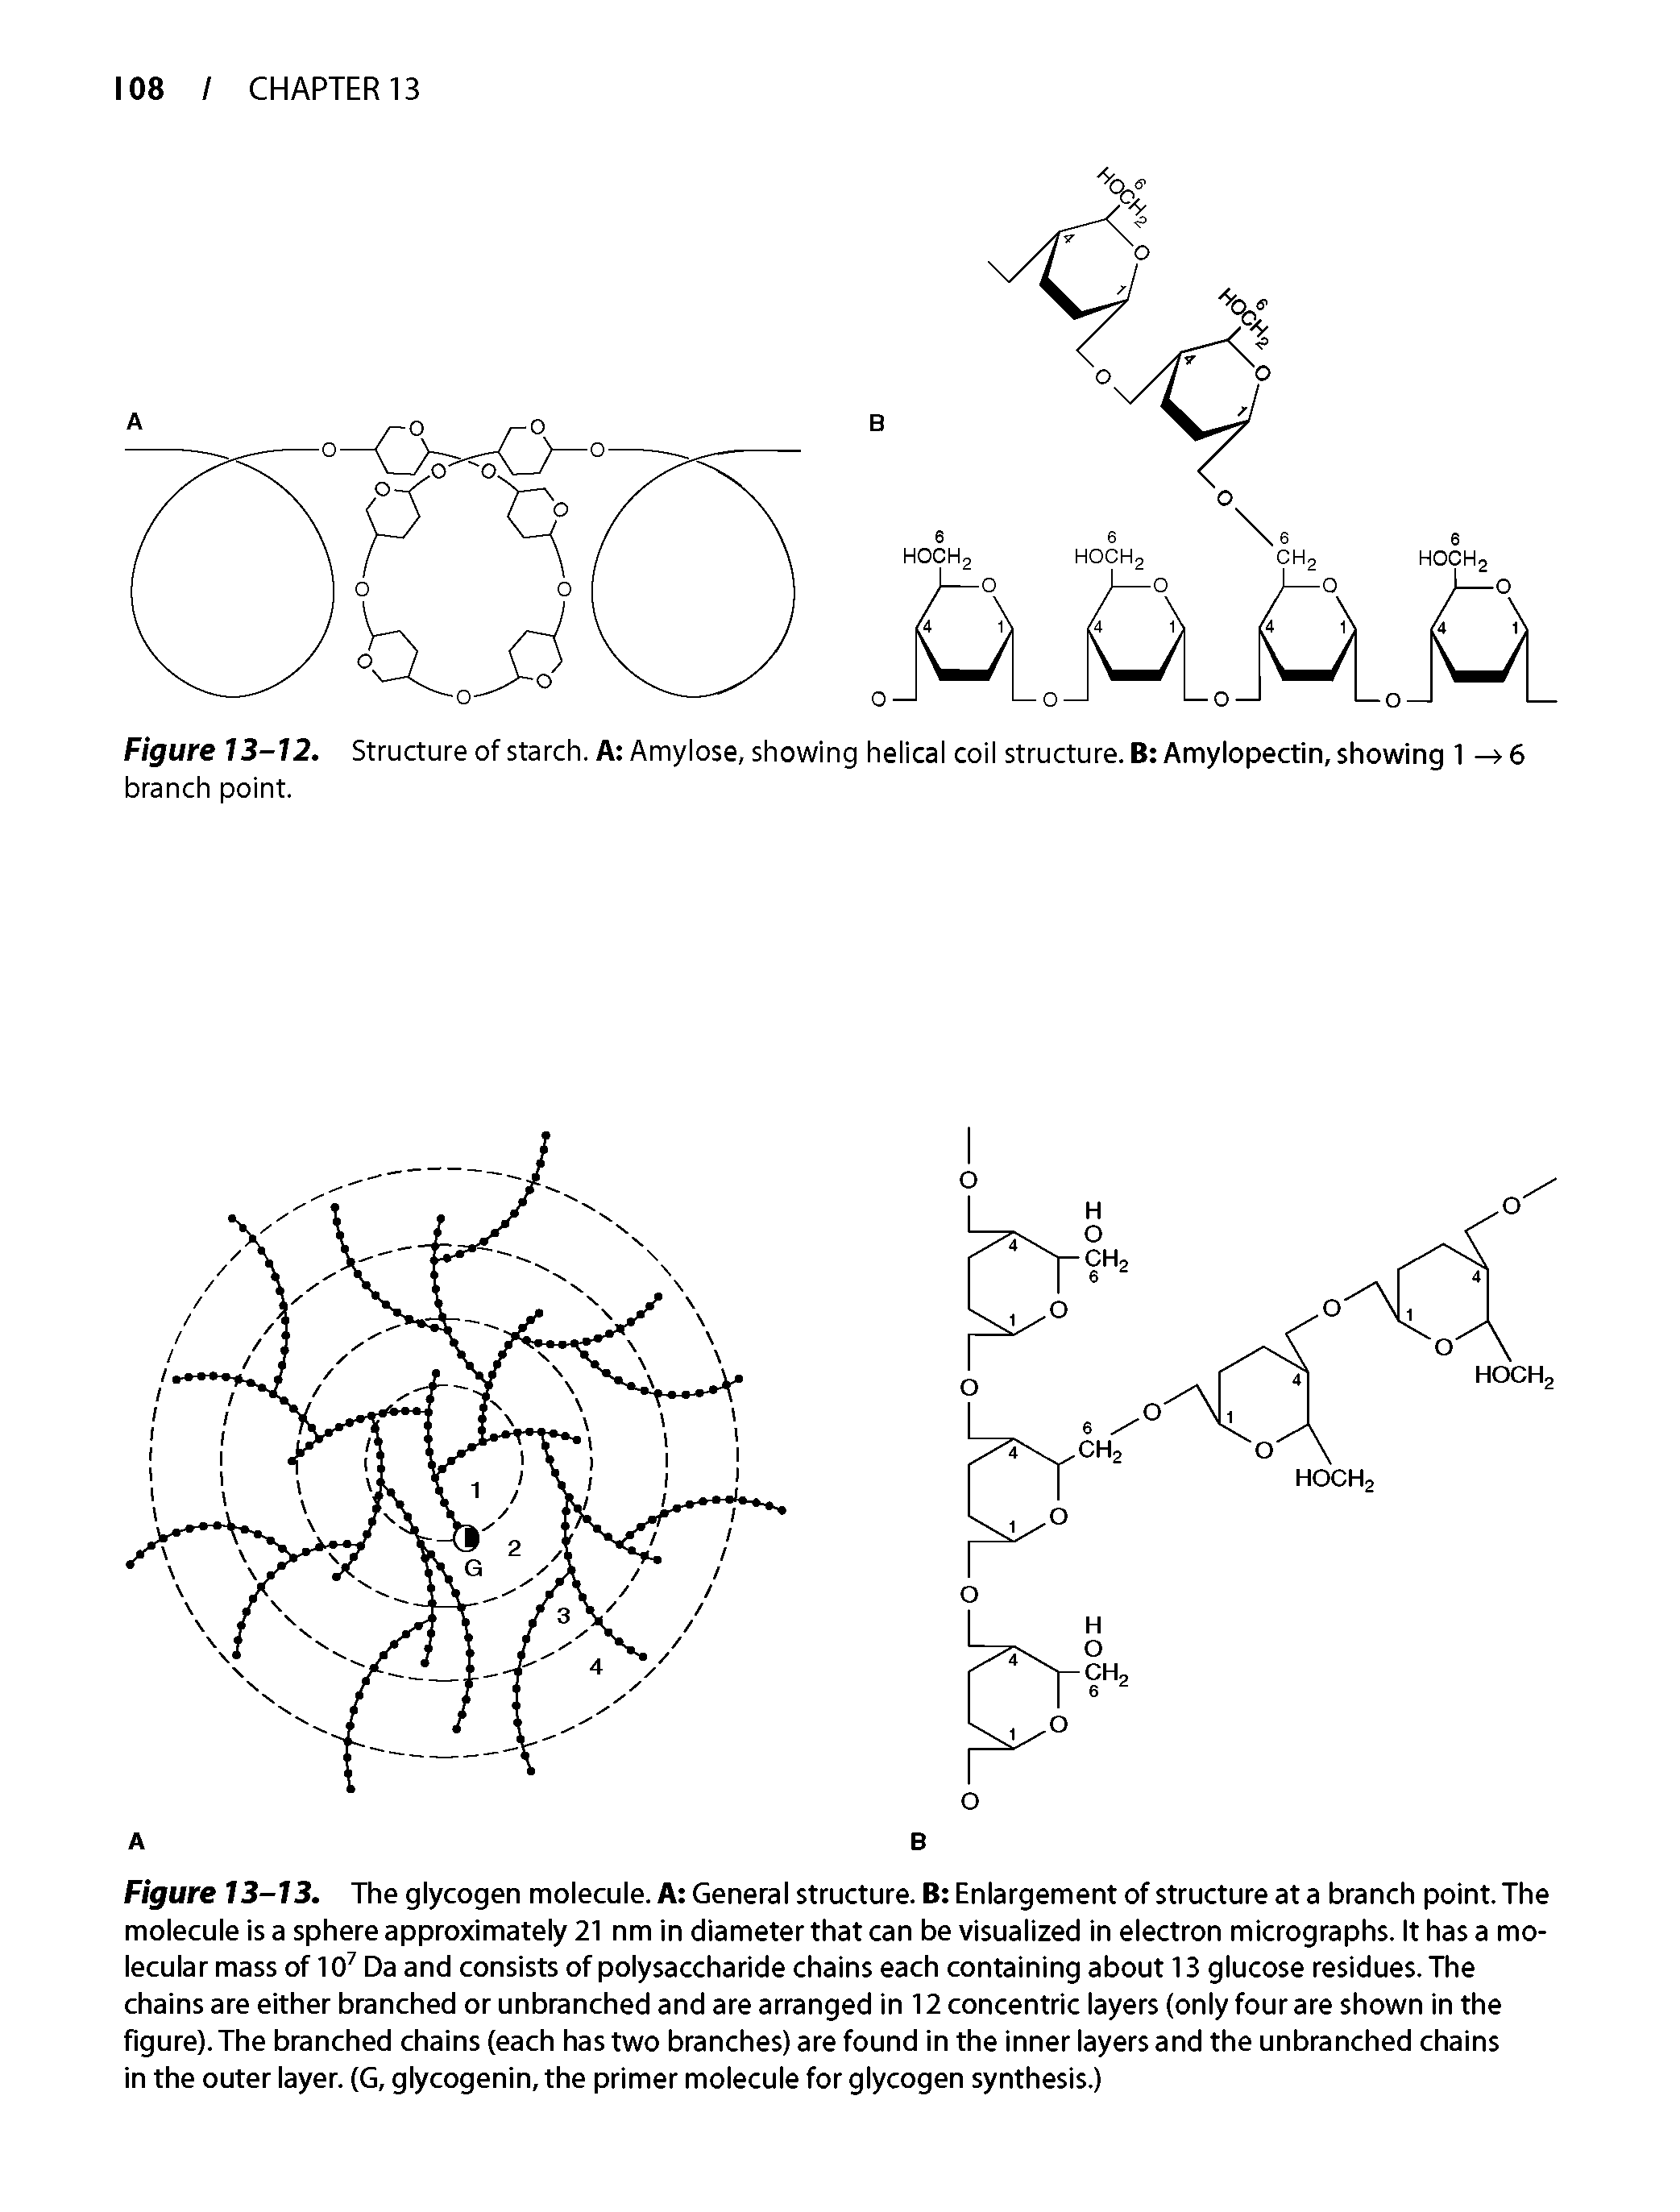 Figure 13-12. Structureofstarch. A Amylose, showing helical coil structure. B Amylopectin, showing 1 - 6 branch point.